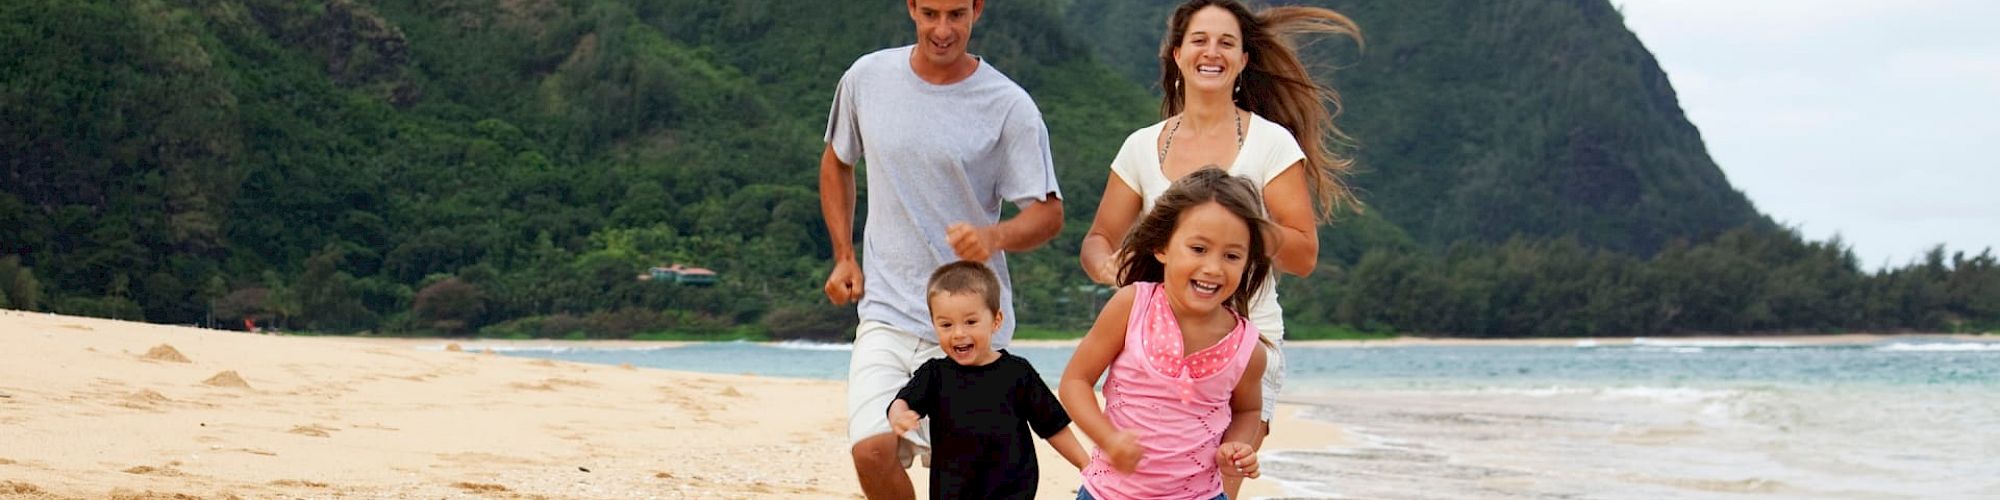 A family of four is happily running on a sandy beach, surrounded by lush green mountains and a calm sea in the background.